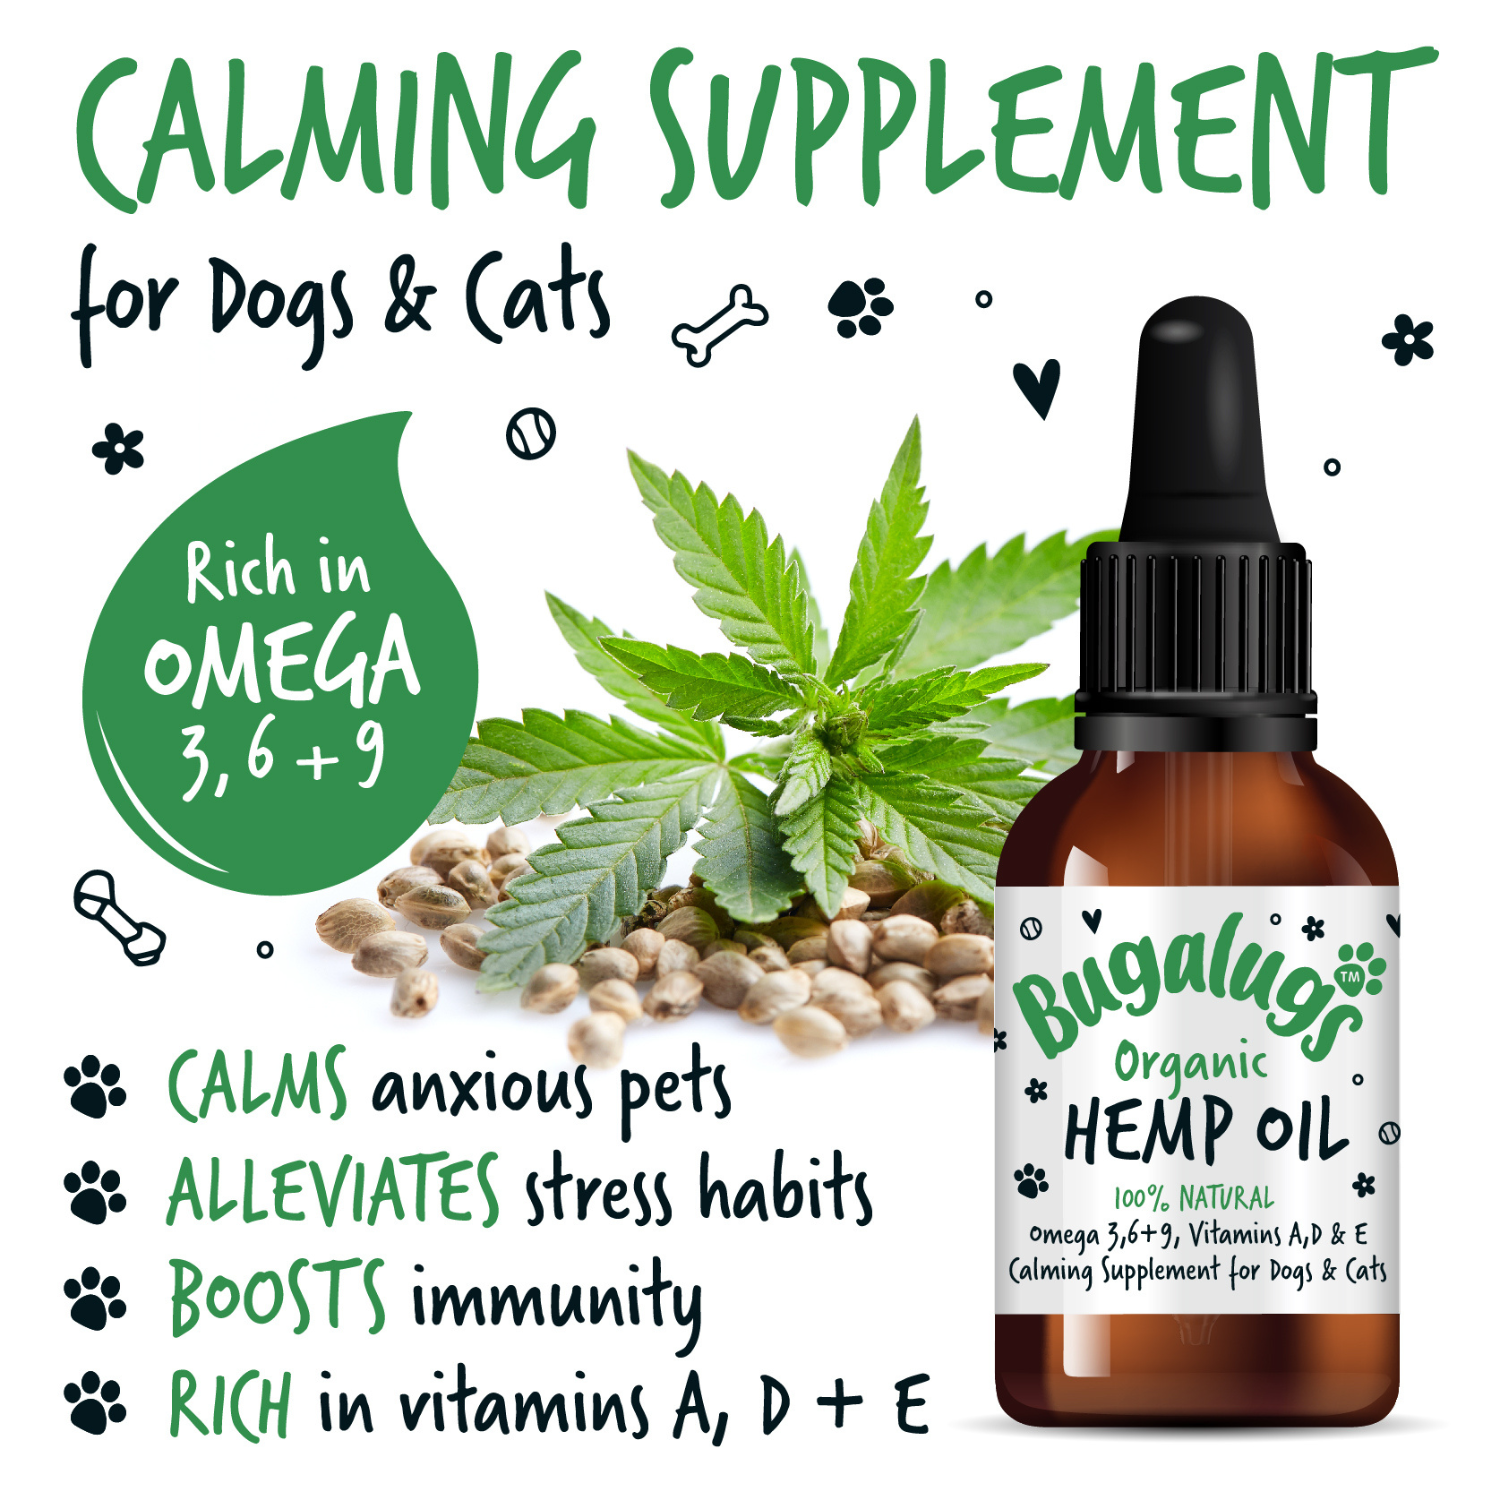 Bugalugs Organic Hemp Oil - Calming supplement for dogs and cats